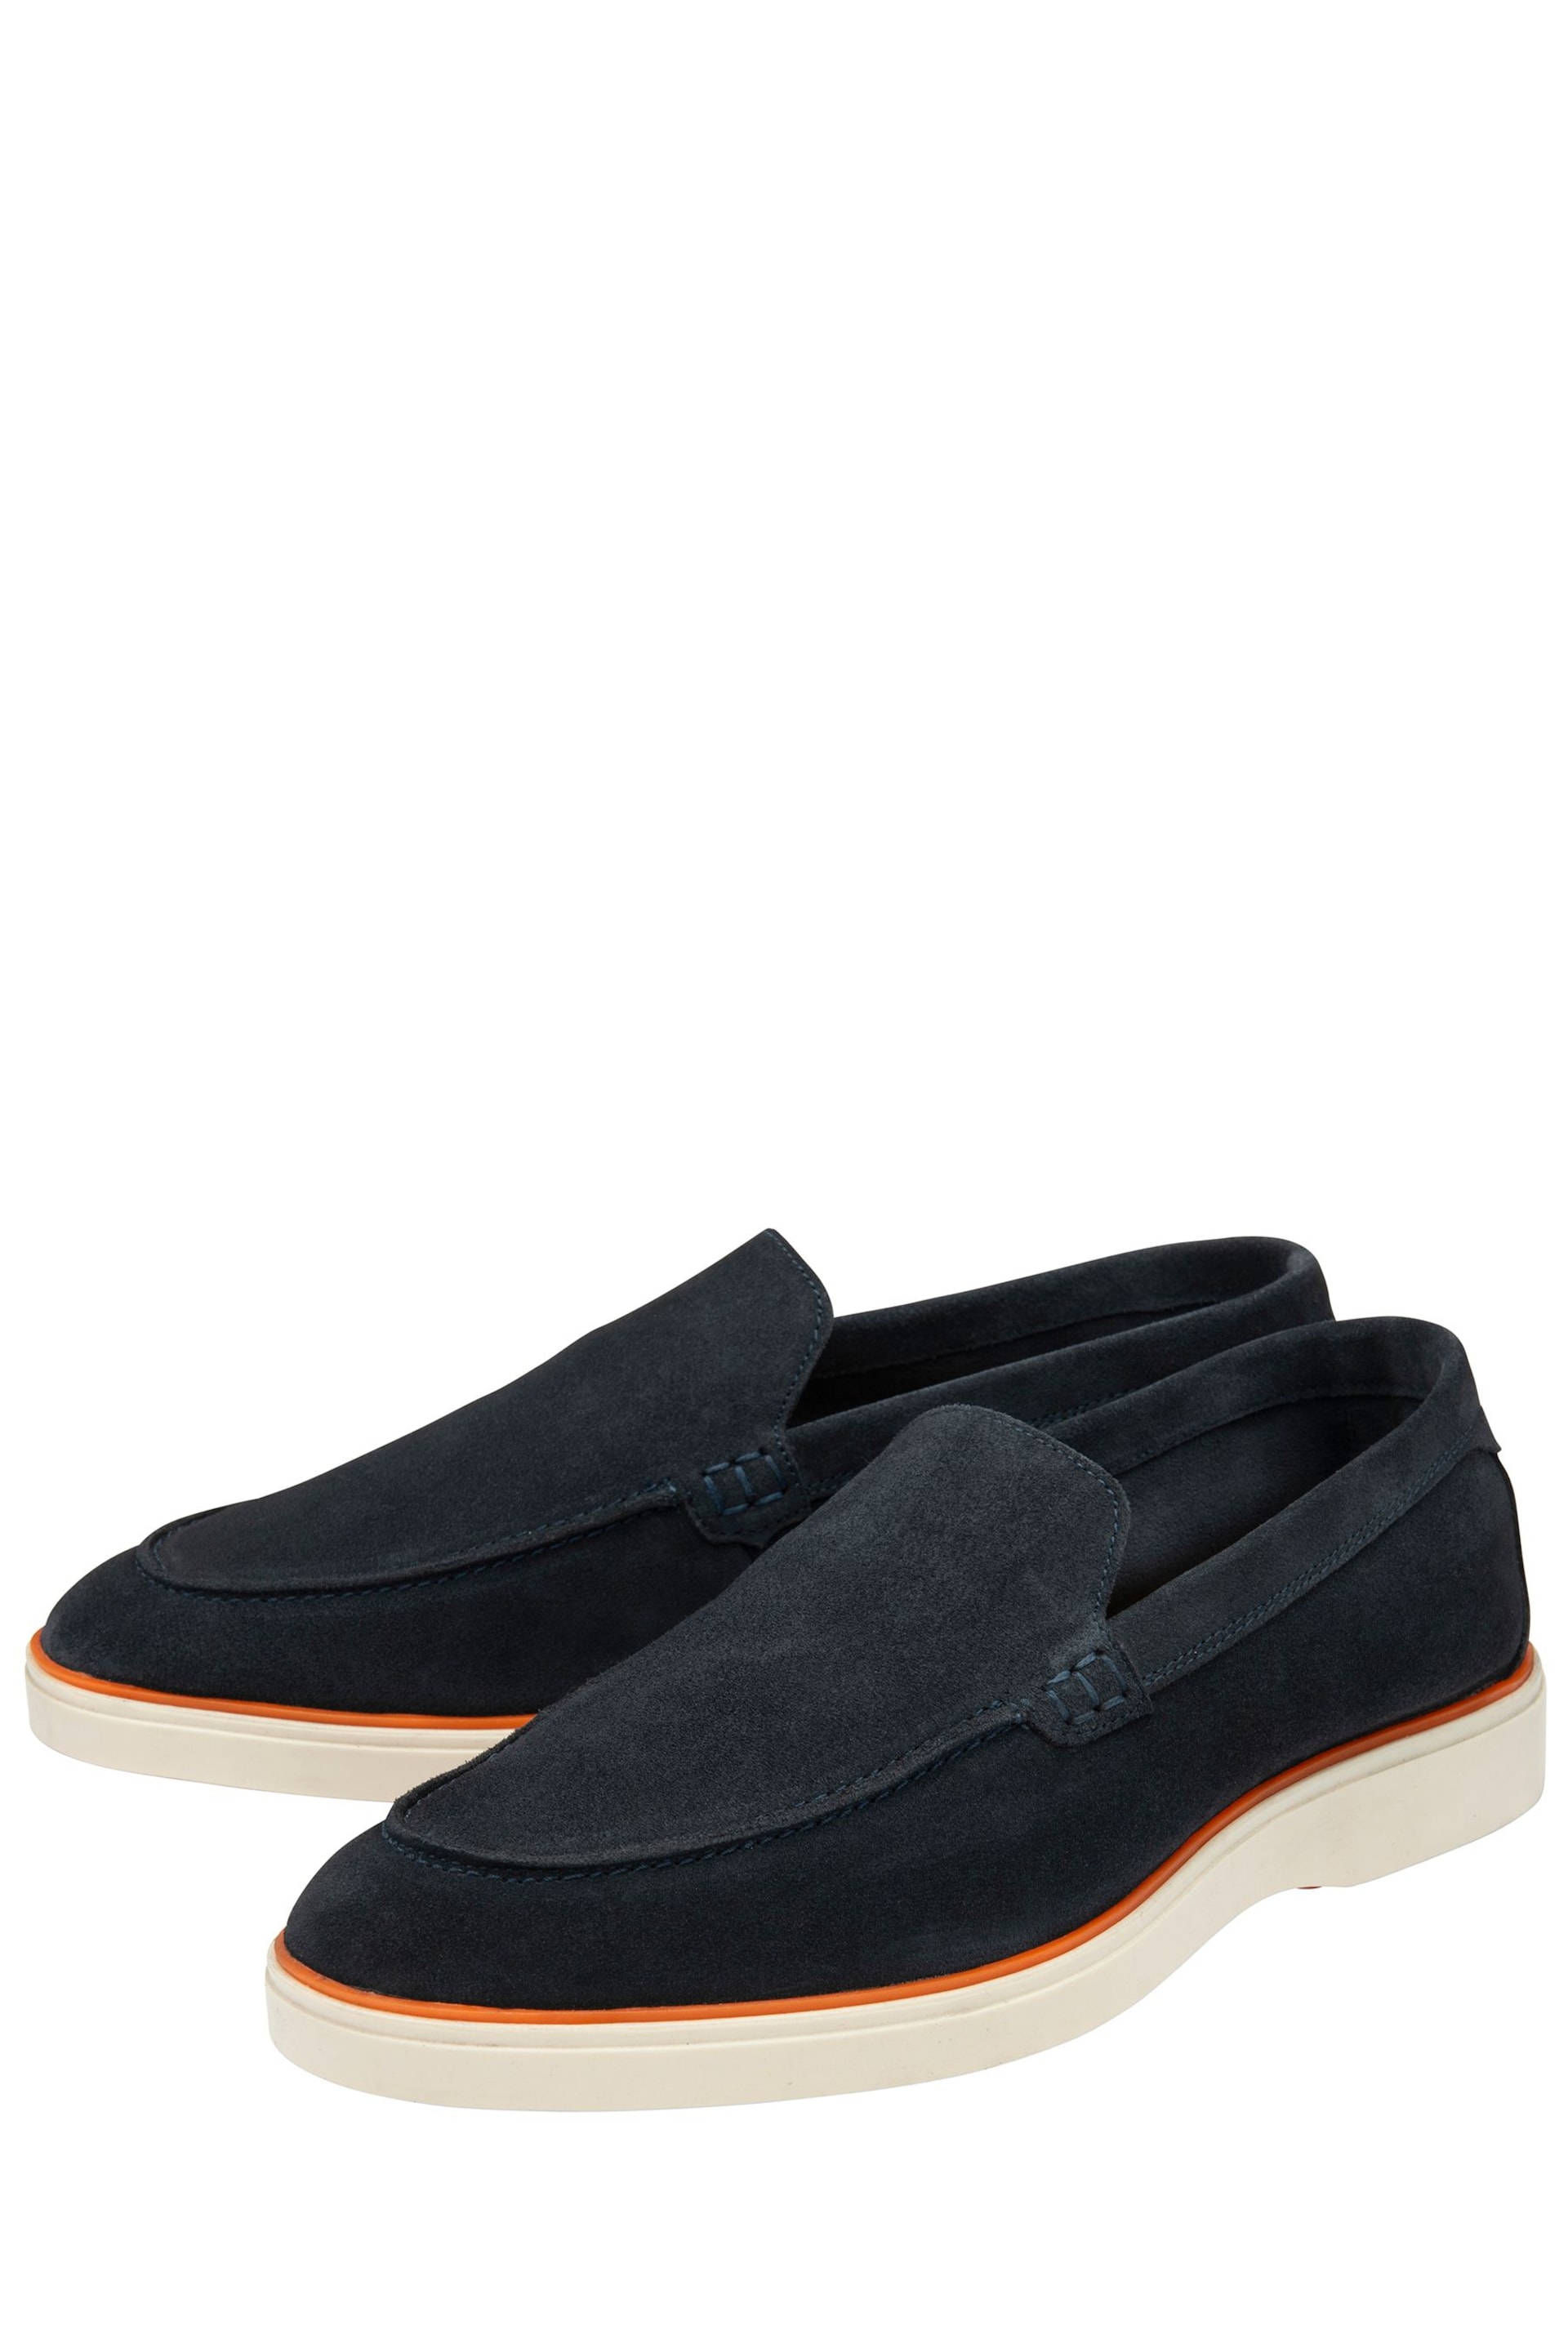 Frank Wright Blue Mens Suede Slip-On Loafers - Image 2 of 4